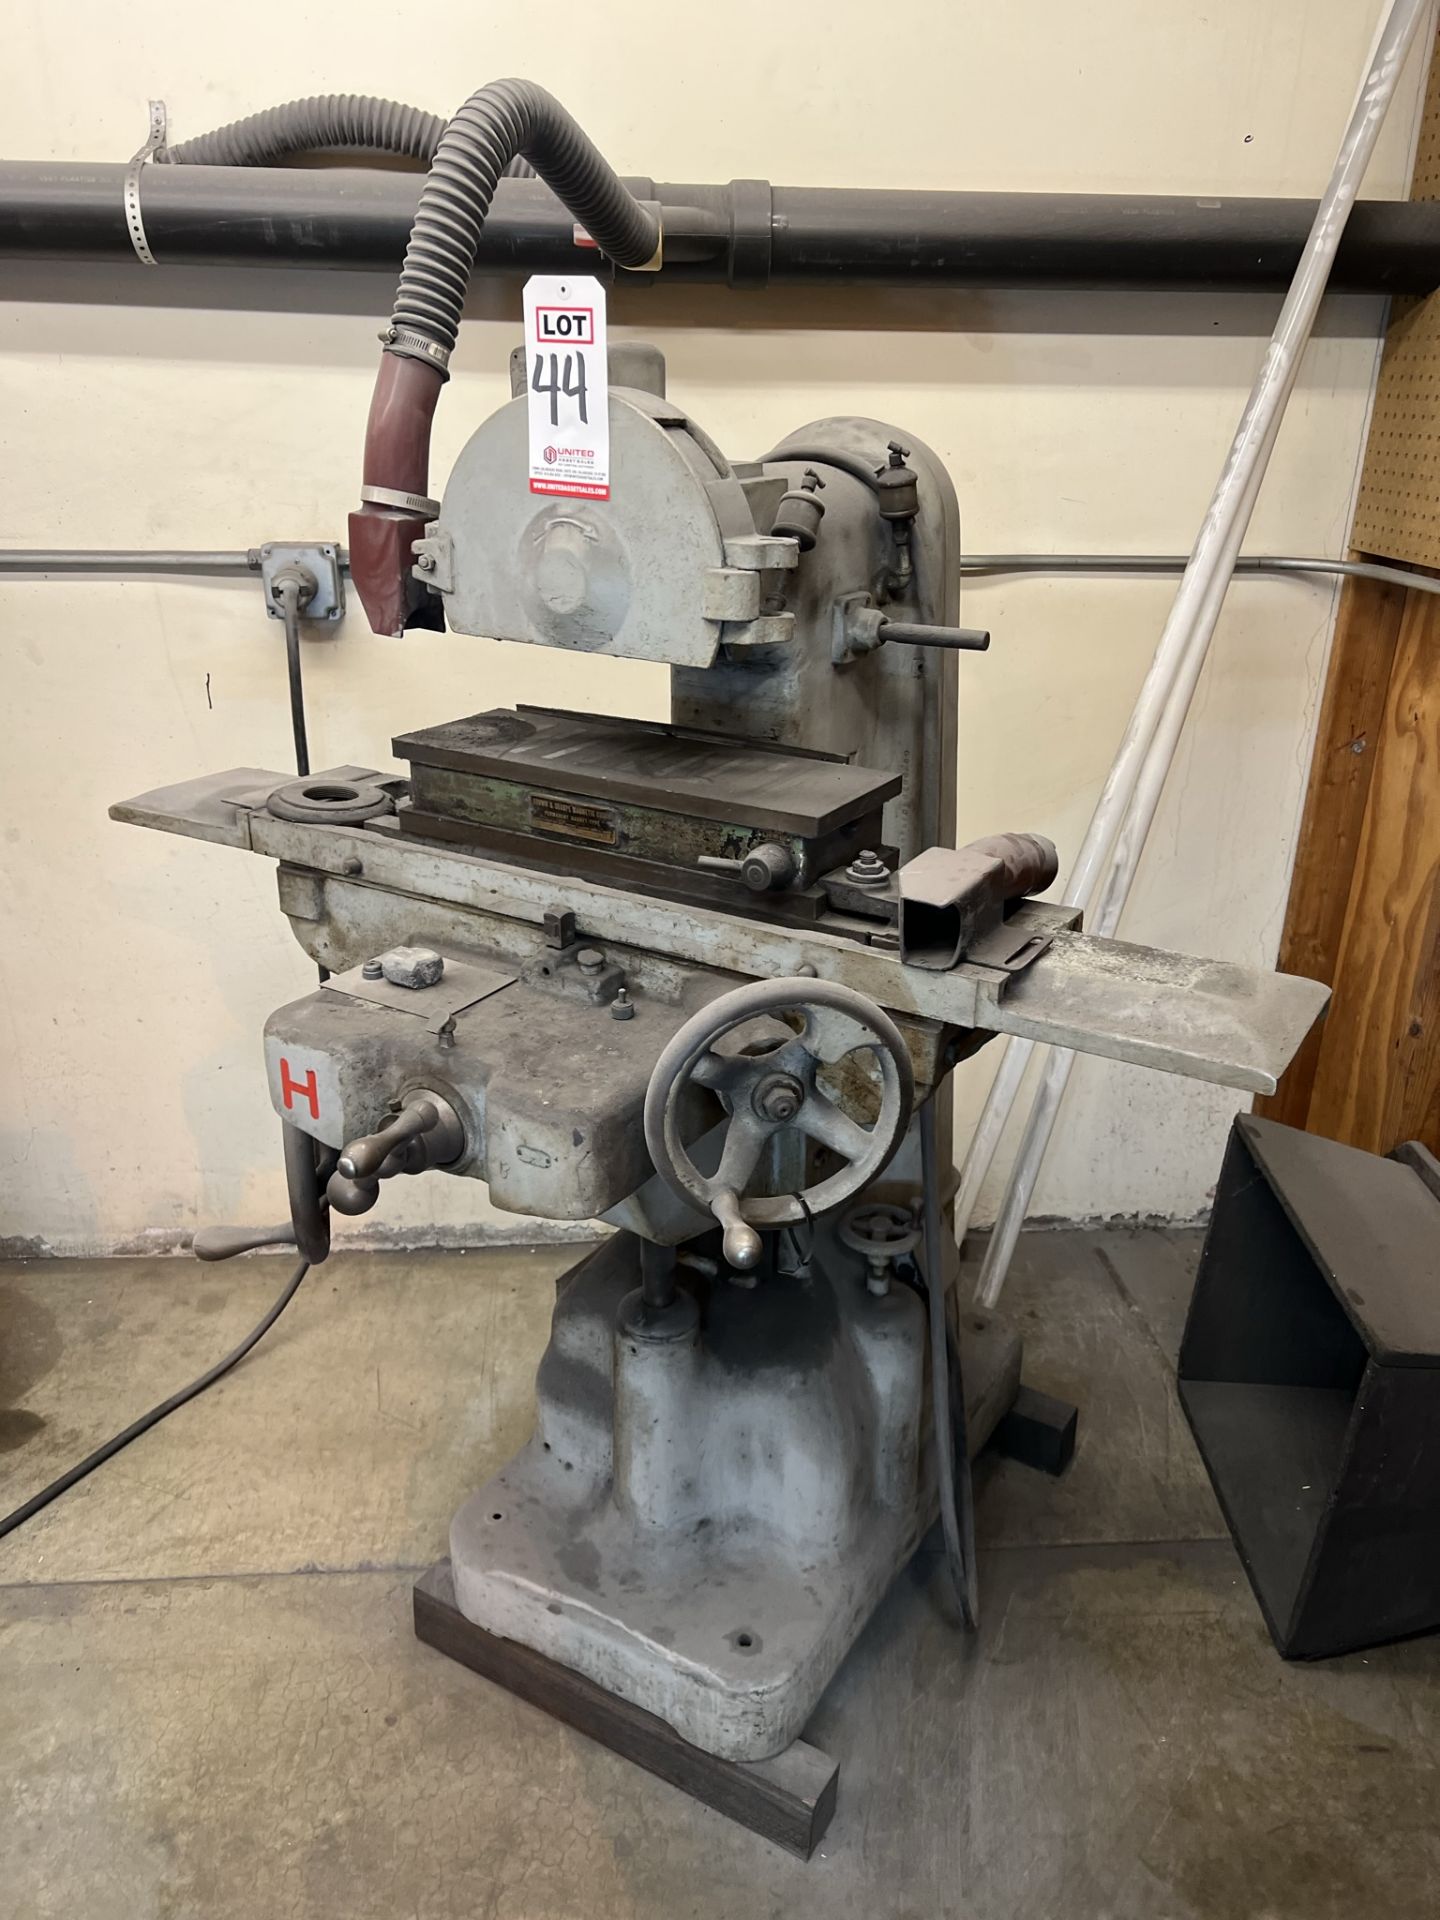 COVEL 18" X 6" SURFACE GRINDER, NO. 15, S/N 15-1650, W/ BROWN & SHARPE 18" X 6" MAGNETIC CHUCK, (H) - Image 2 of 3